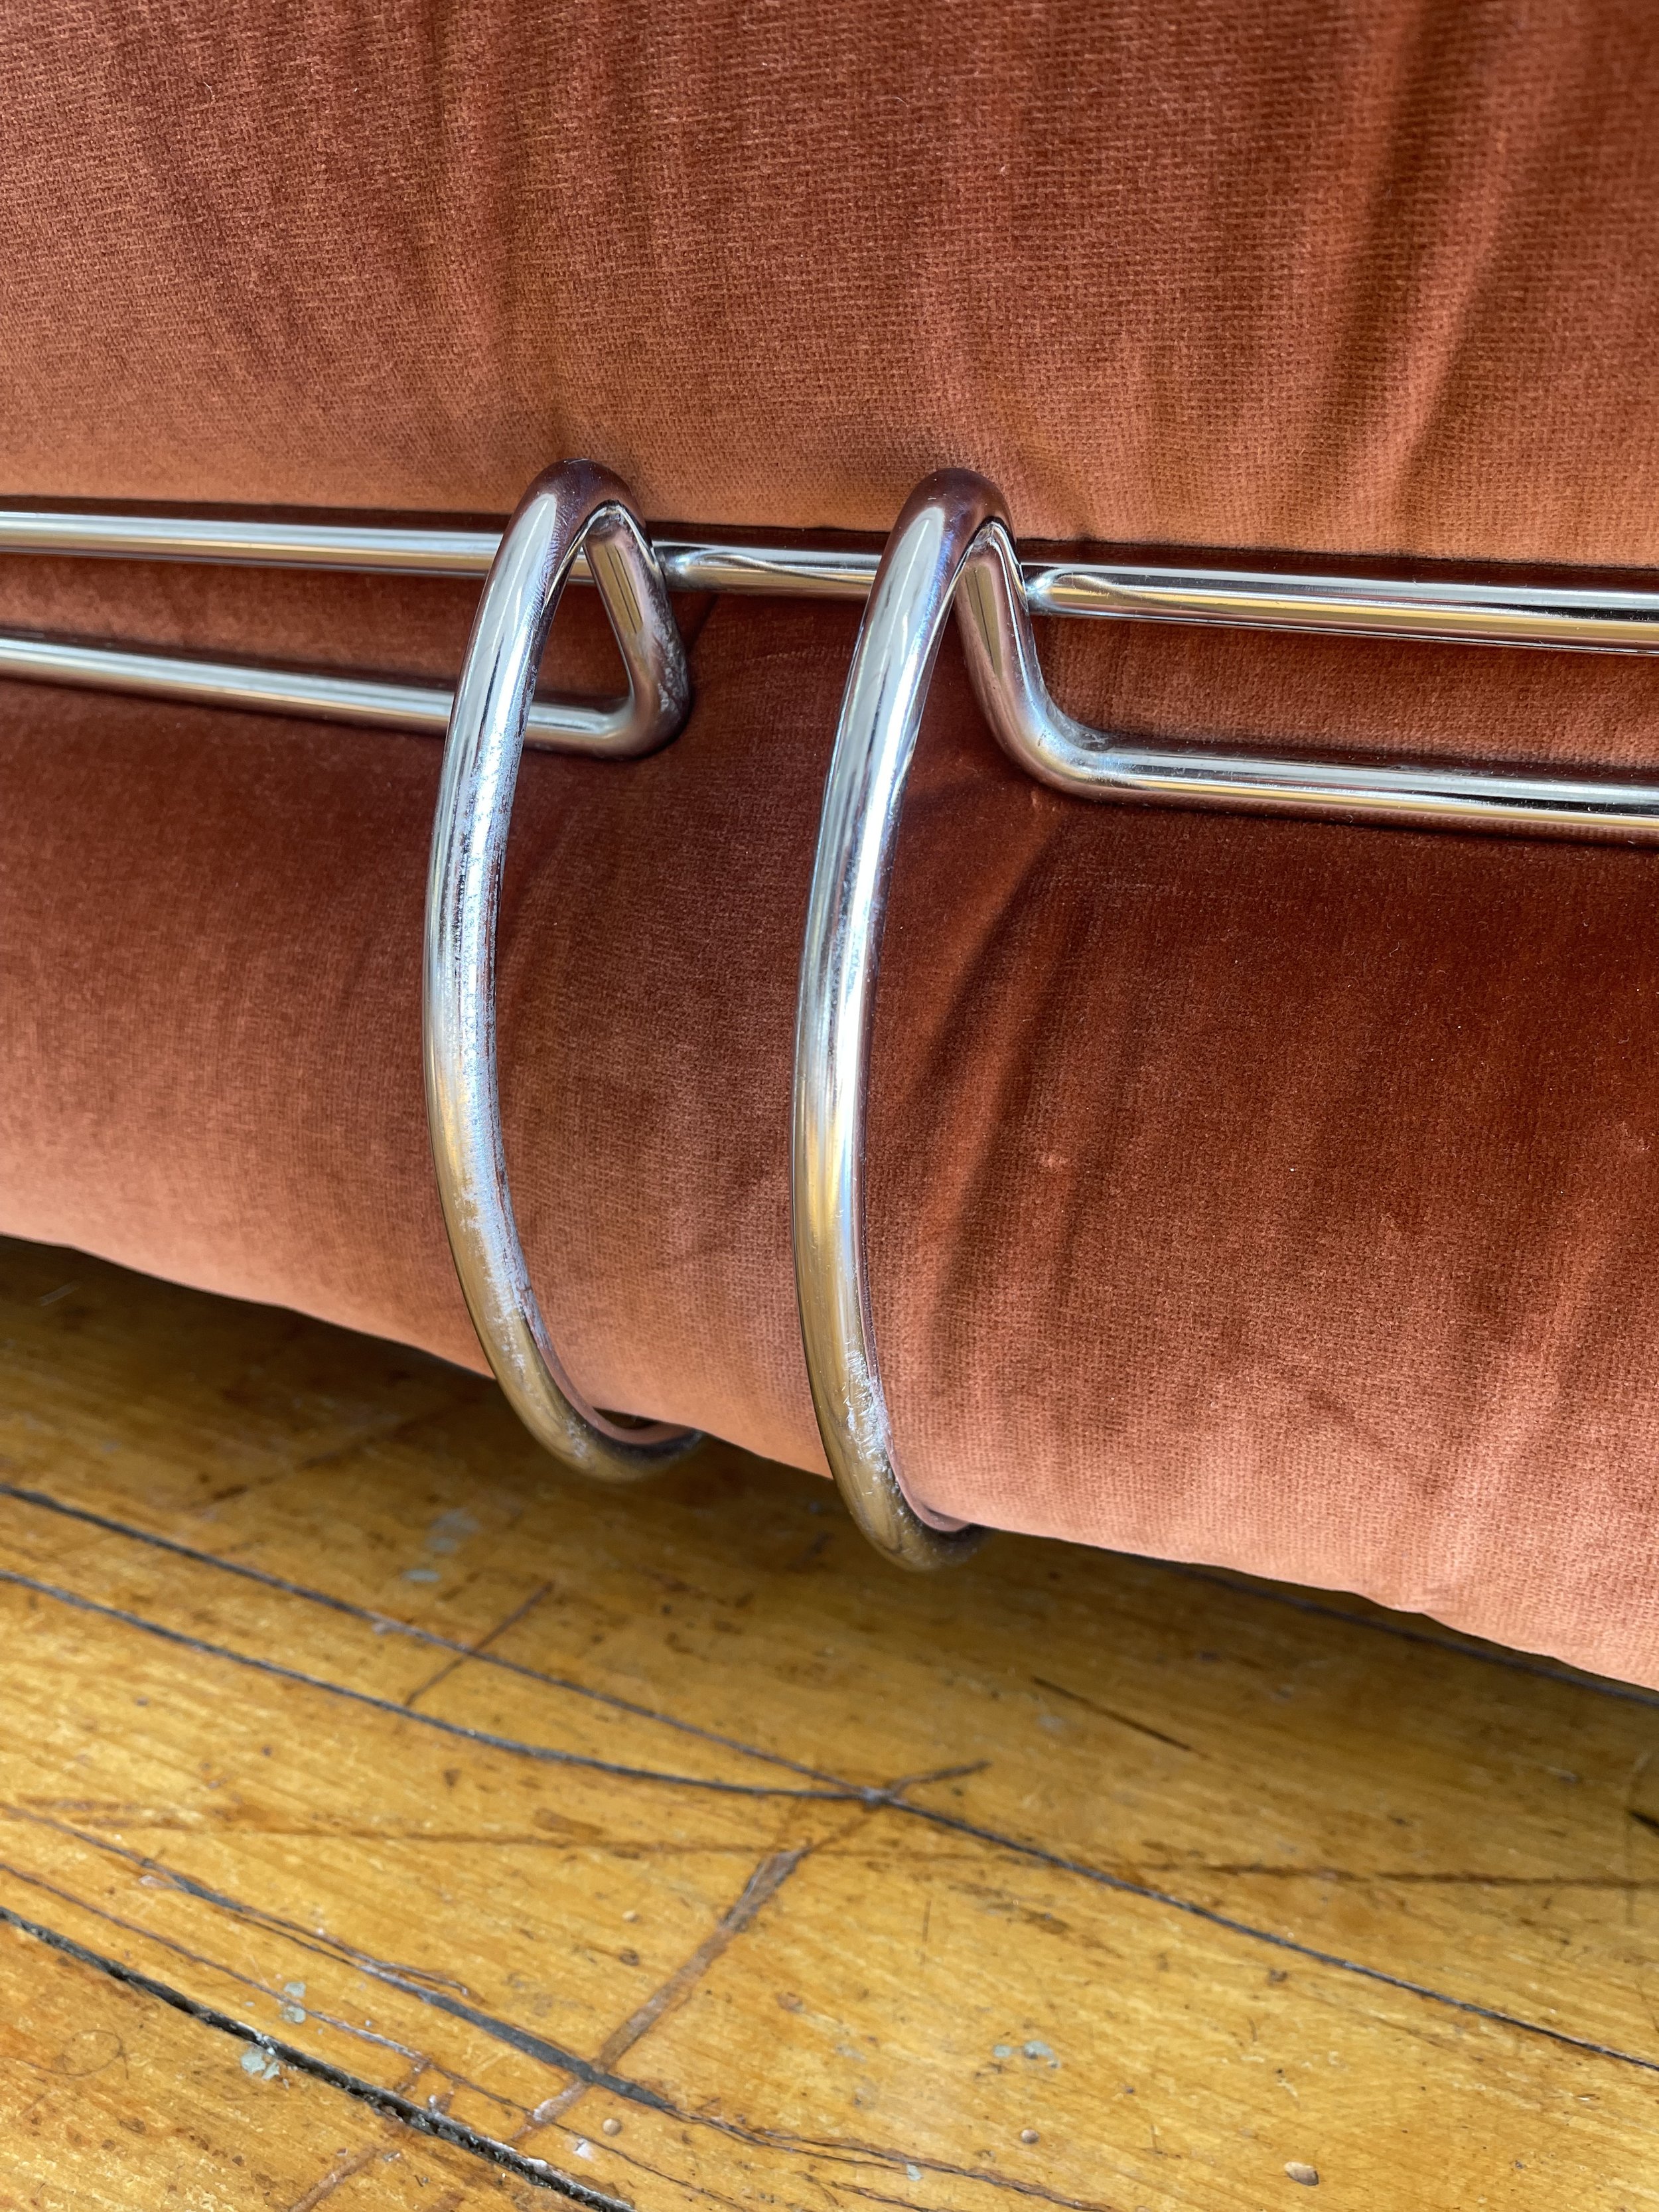 Vintage Soriana Sofa design Tobia Scarpa for Cassina 1970s | view of the metal clamps